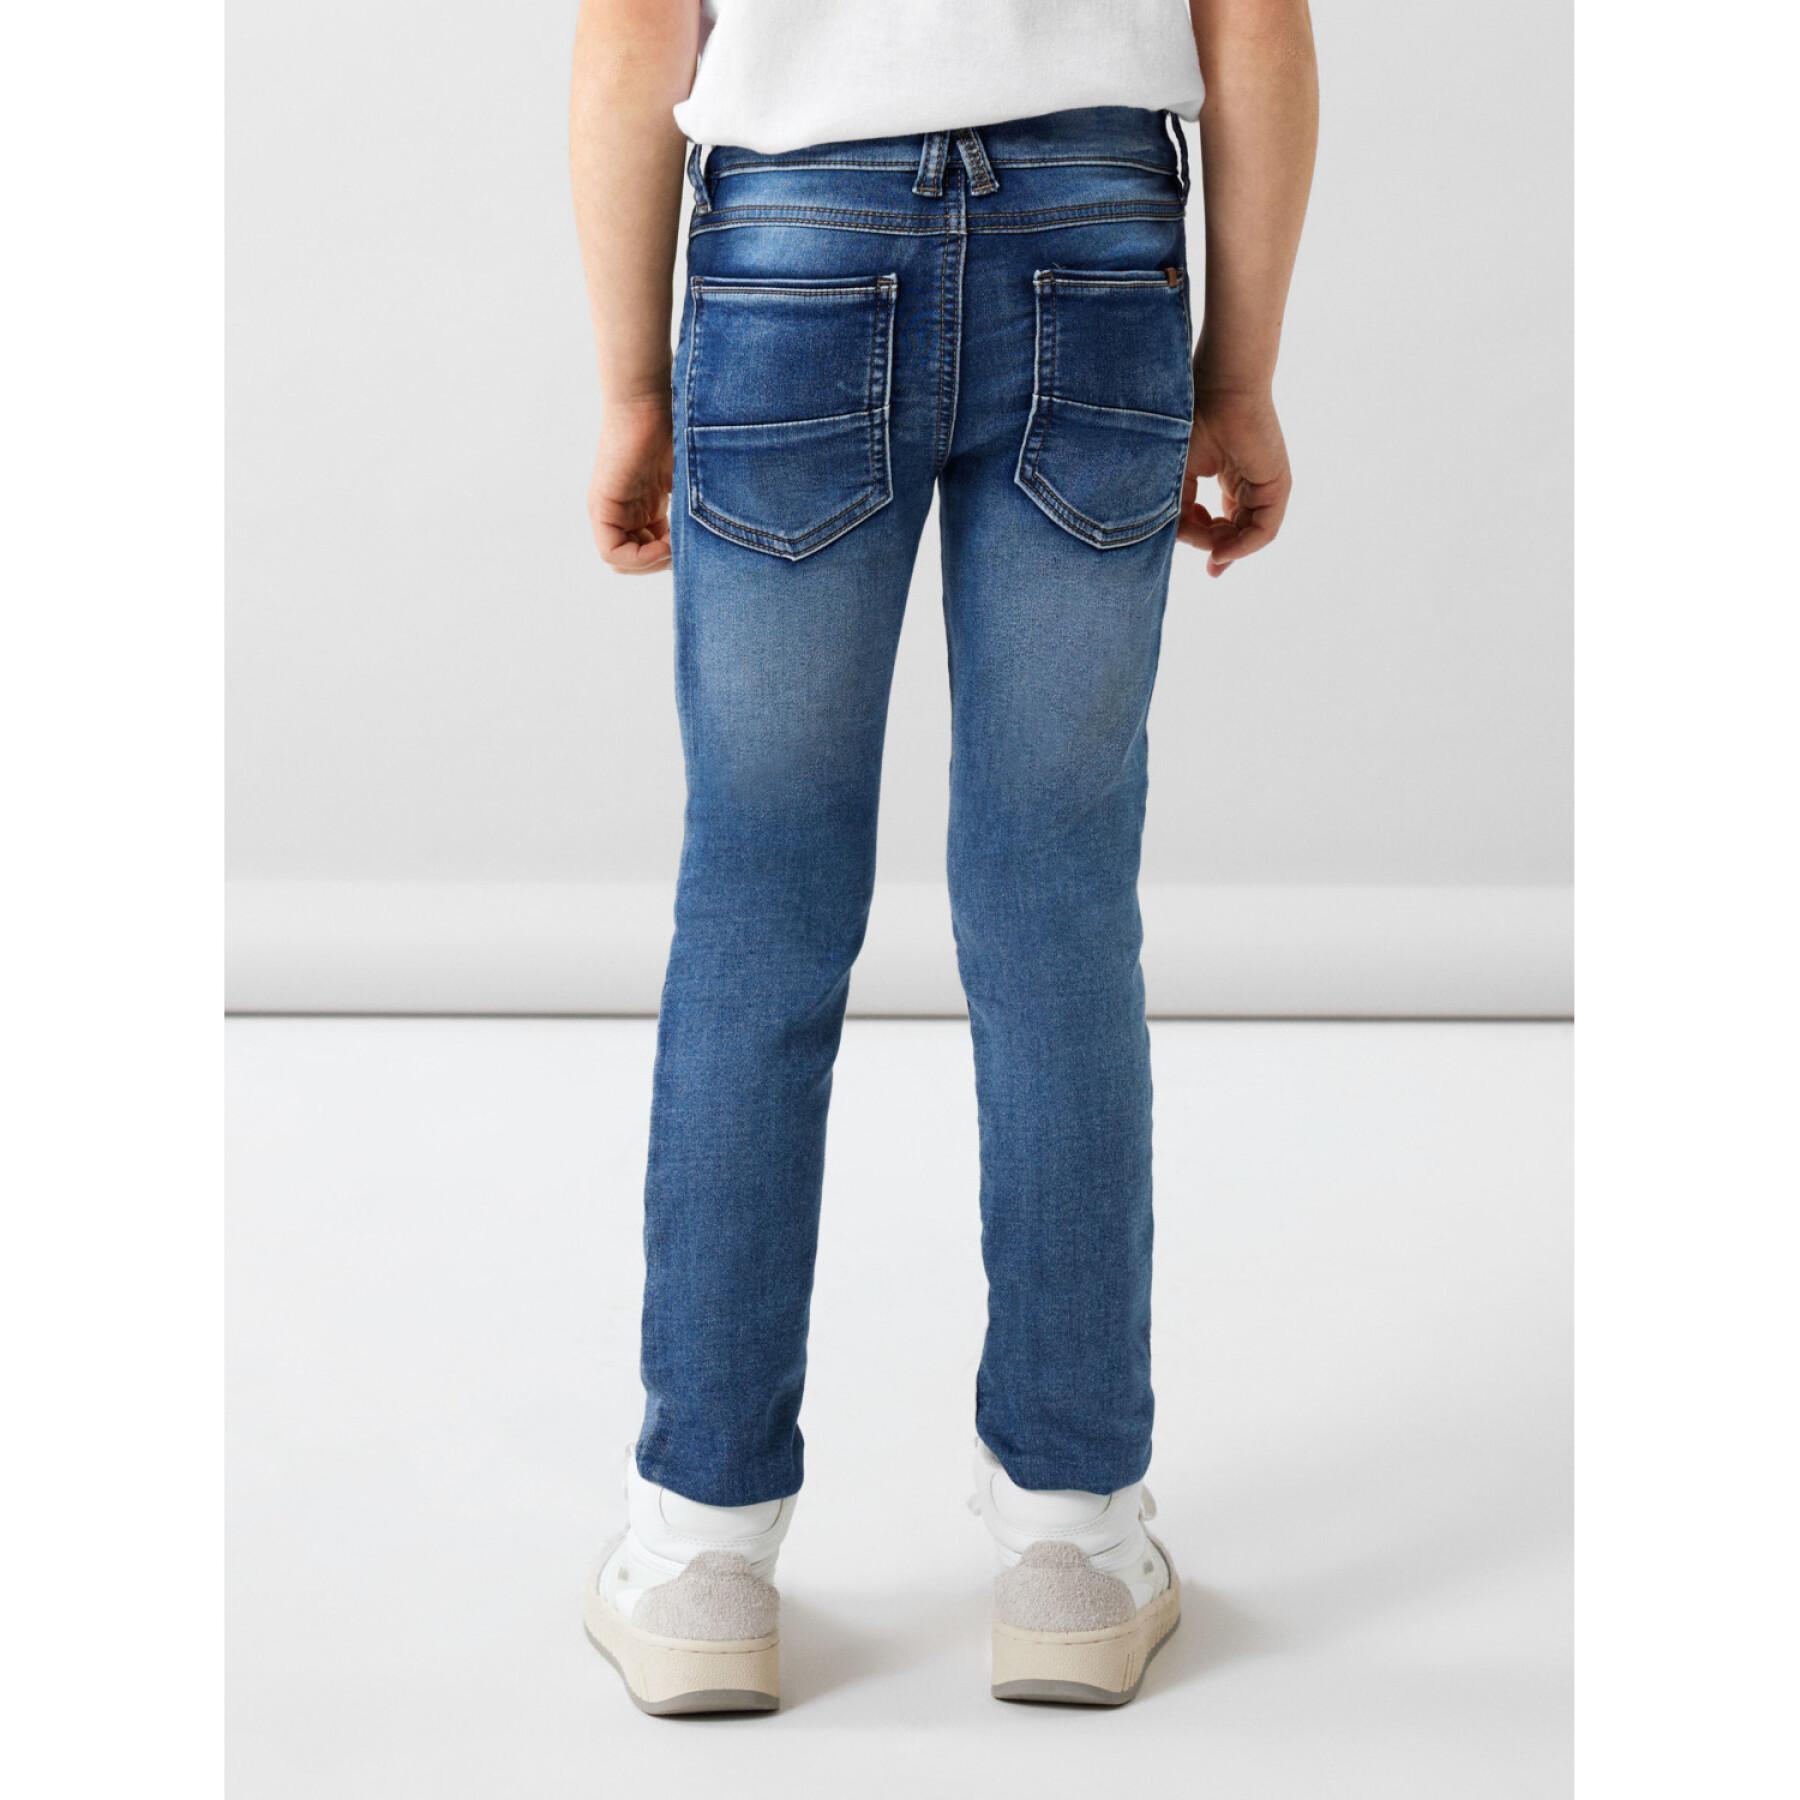 Jeans chico Name it Theo 3113-TH